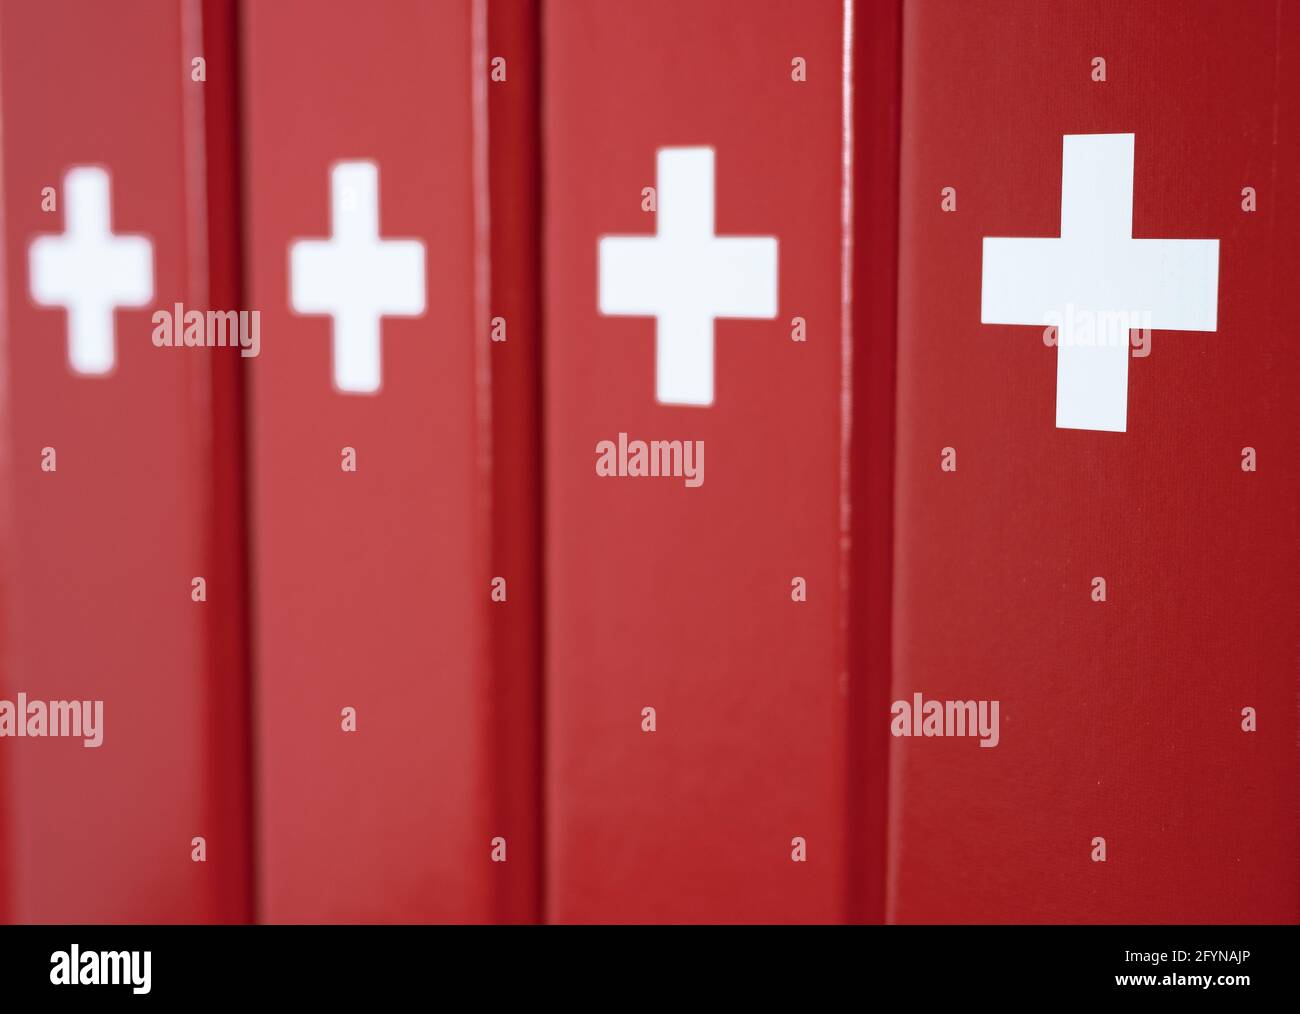 Red folders with a white cross - imitation of a swiss flag in office environment Stock Photo